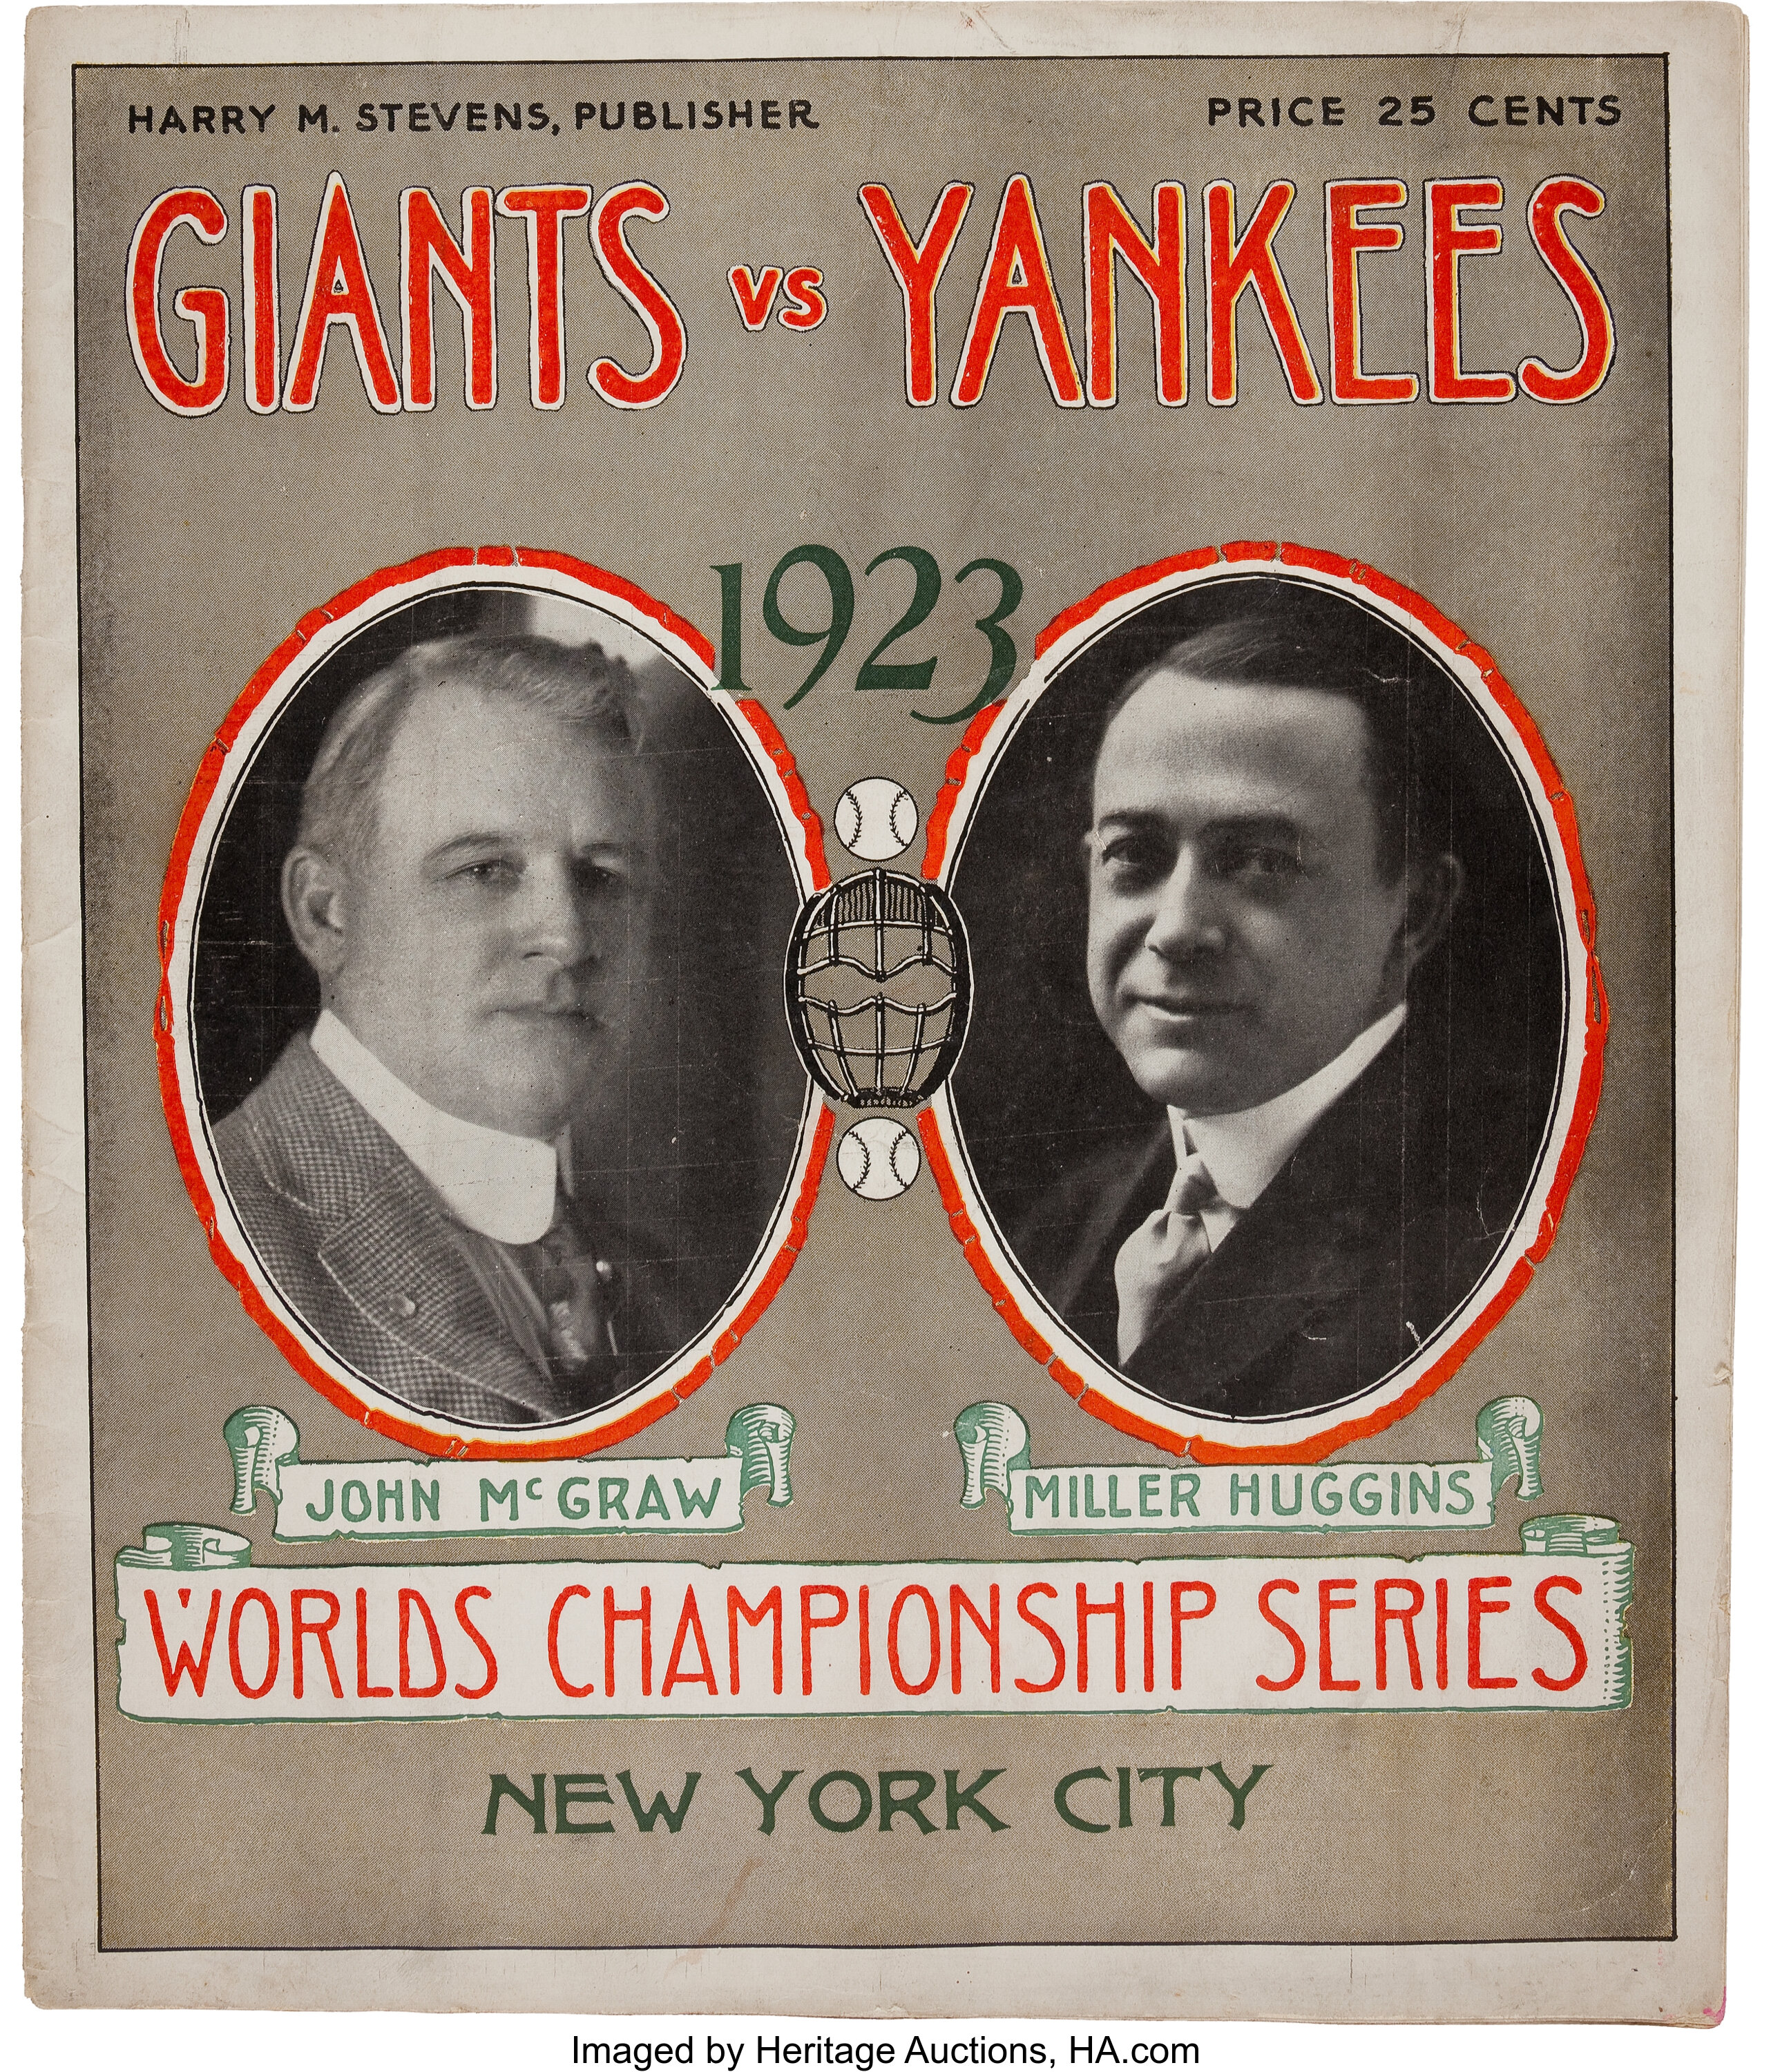 How Did The Yankees Win Their First World Series In 1923?